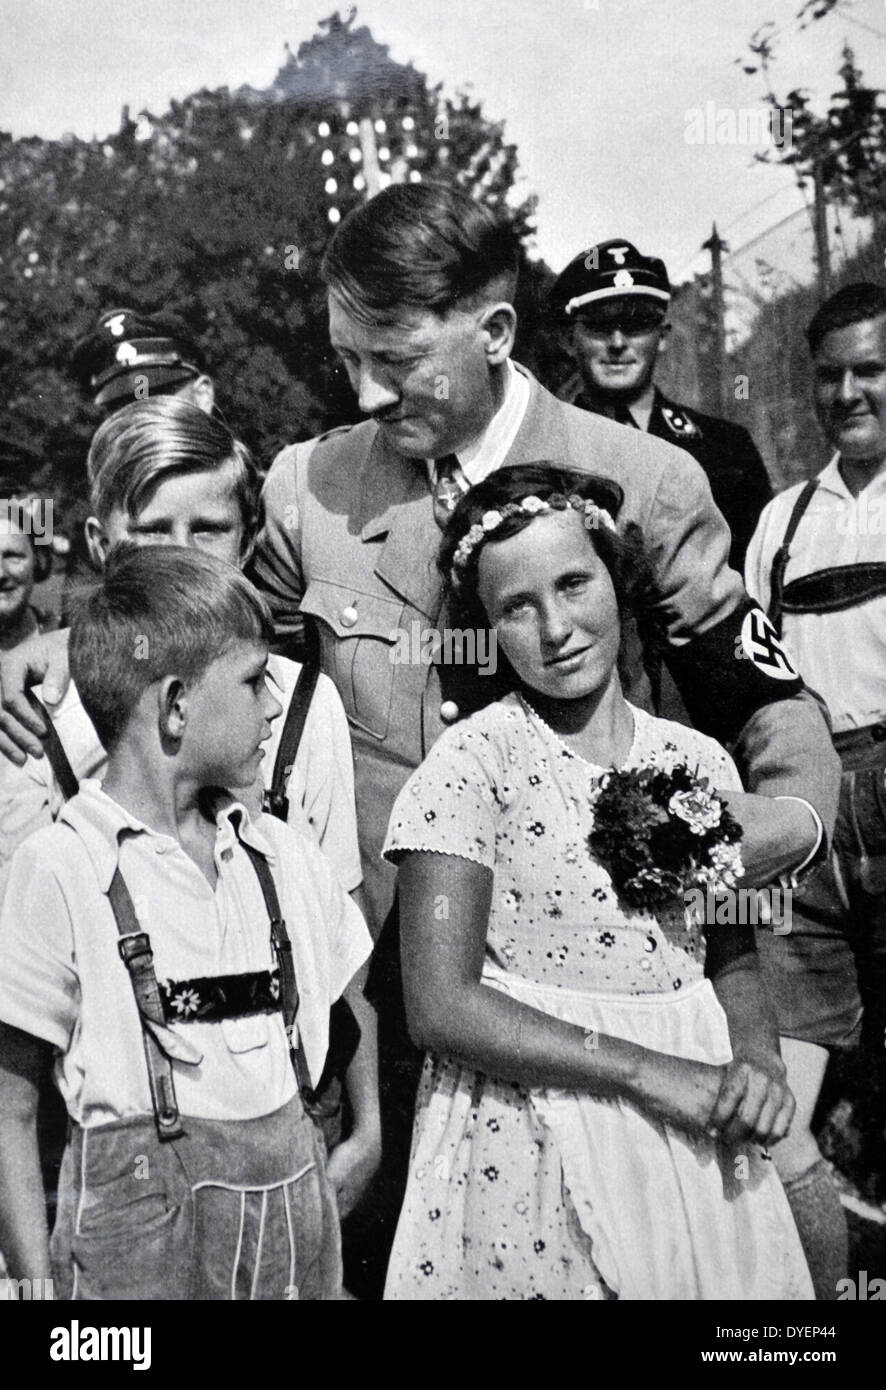 Adolf Hitler 1889-1945. German politician and the leader of the Nazi Party, greeted by  Hitler Youth  as Baldur von Schirach looks on Stock Photo